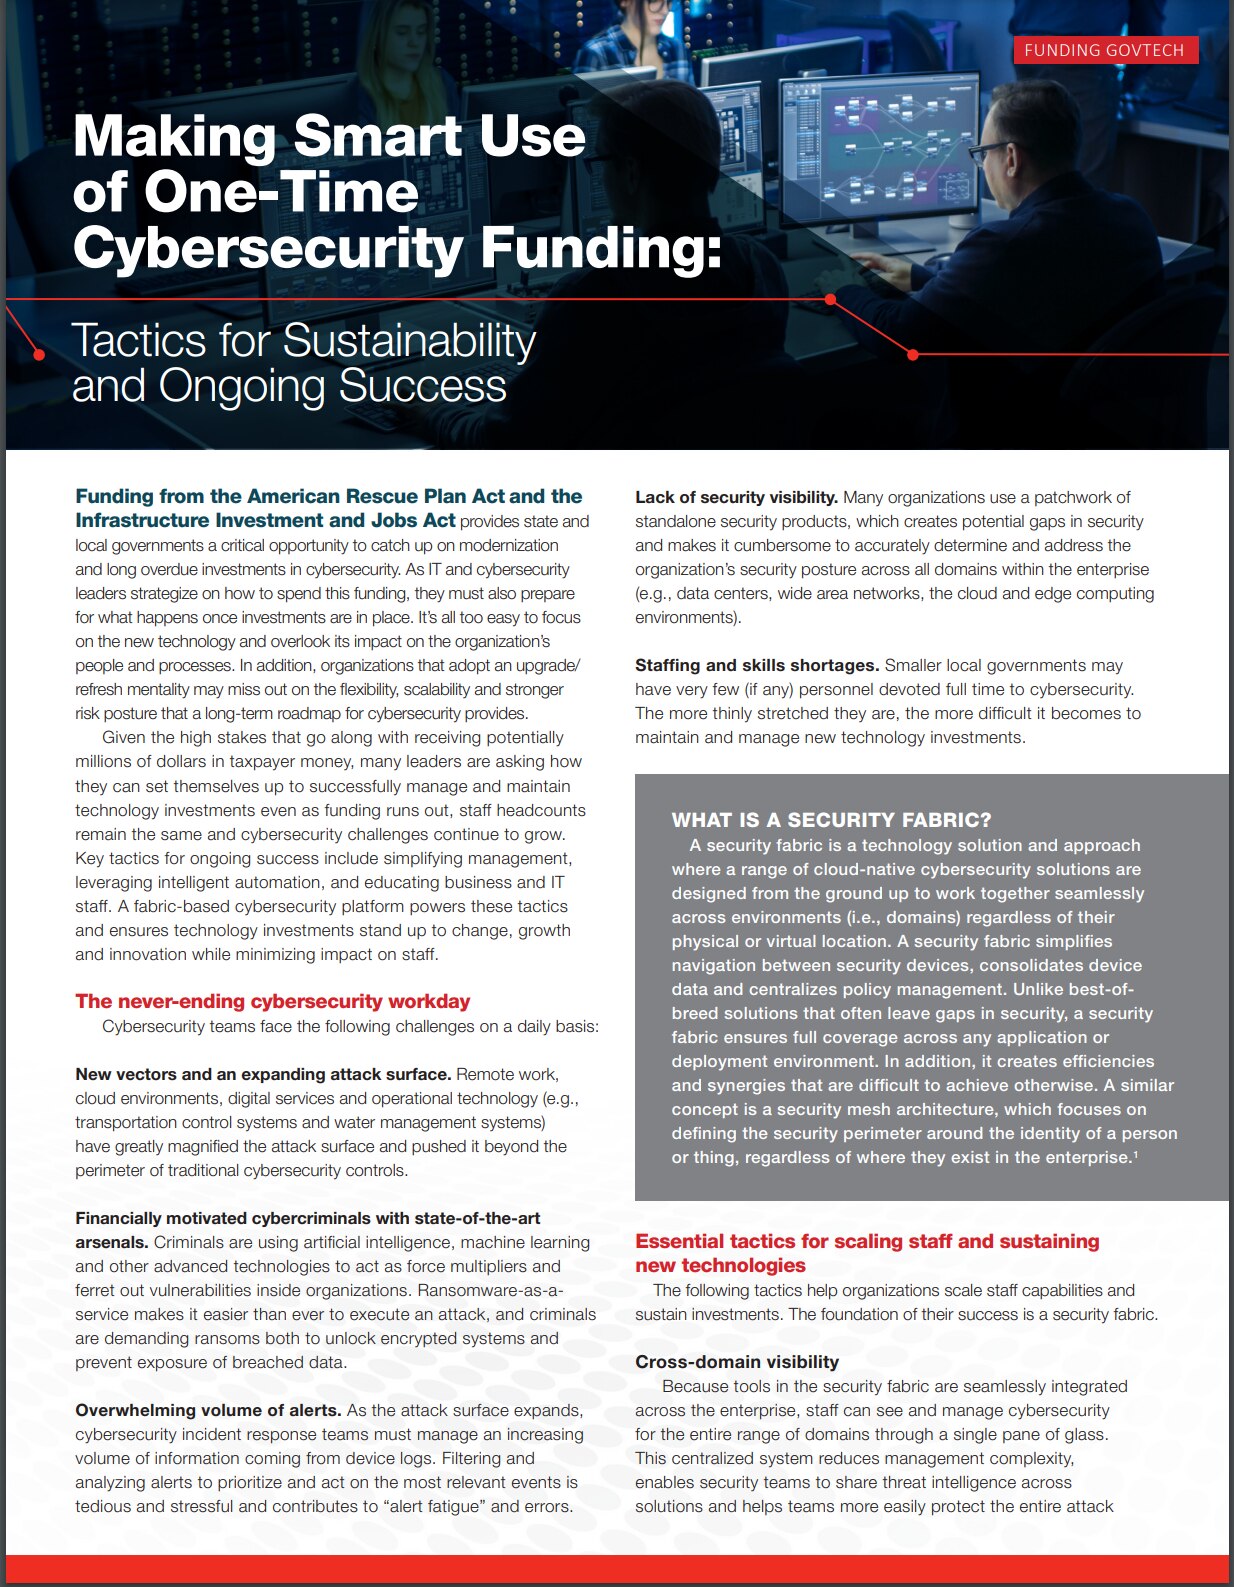 Making Smart Use of One-Time Cybersecurity Funding (sold in package, 10pc per package)